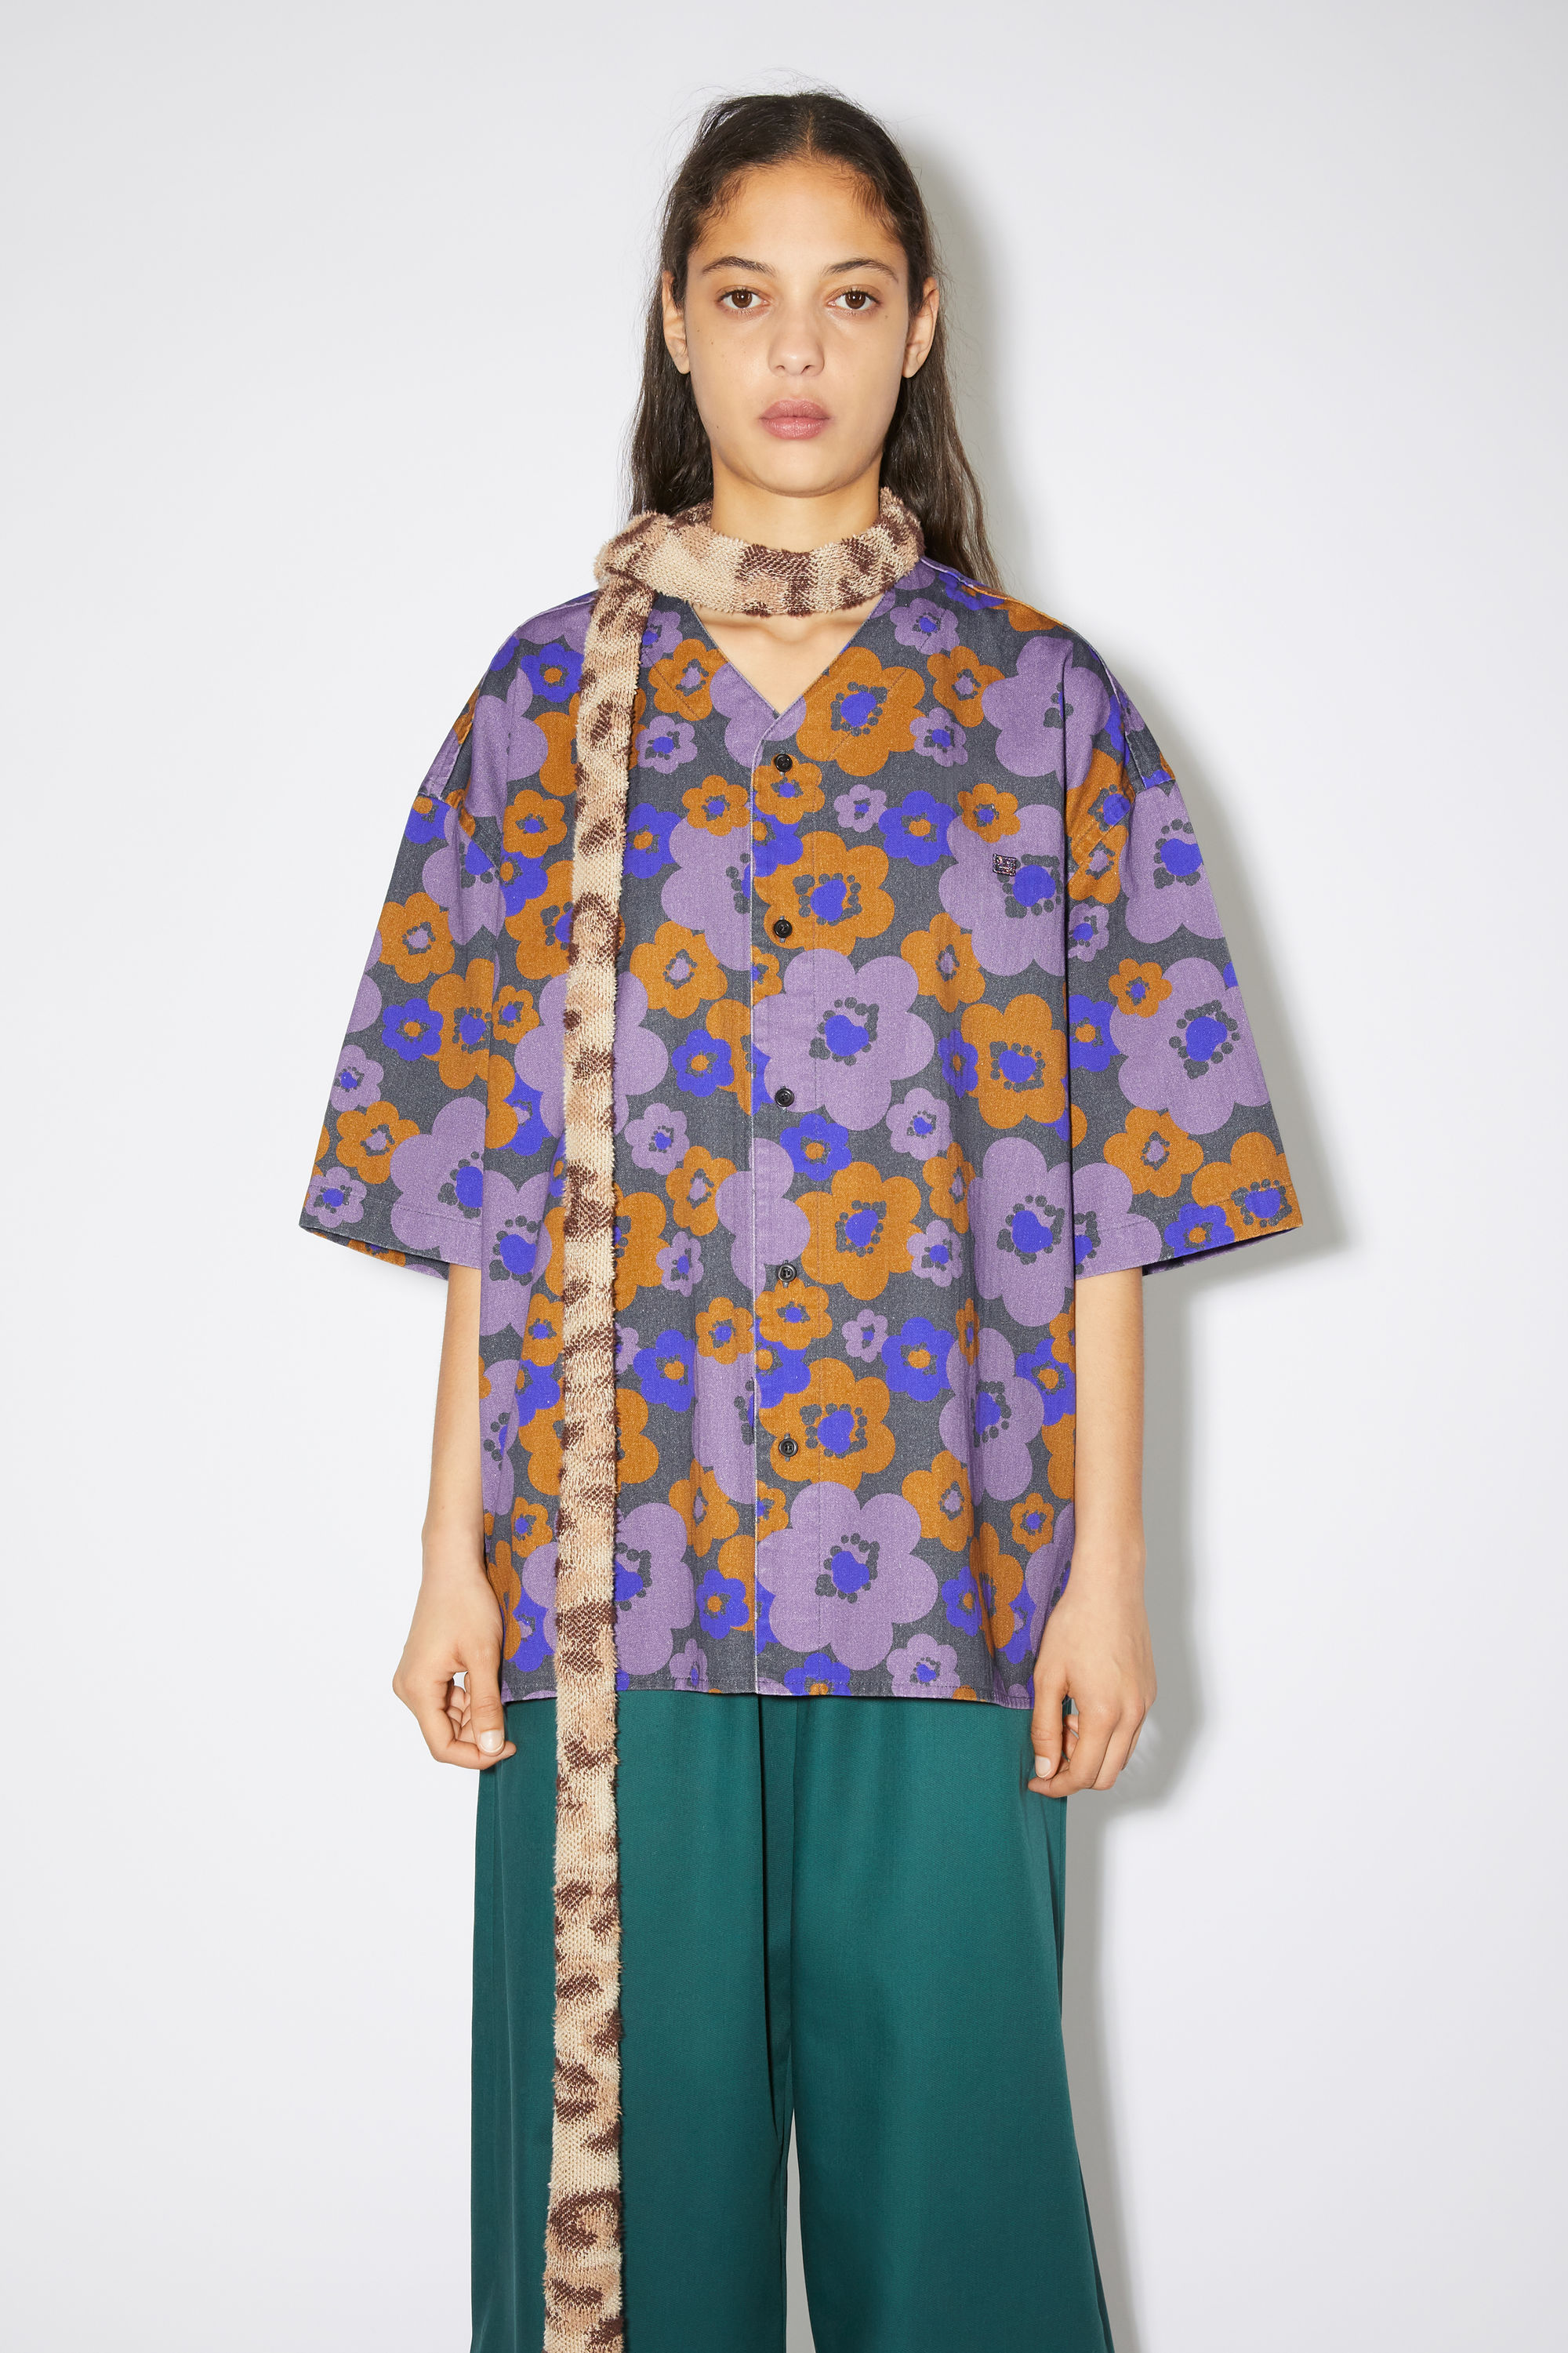 Acne Studios – Women’s shirts and blouses